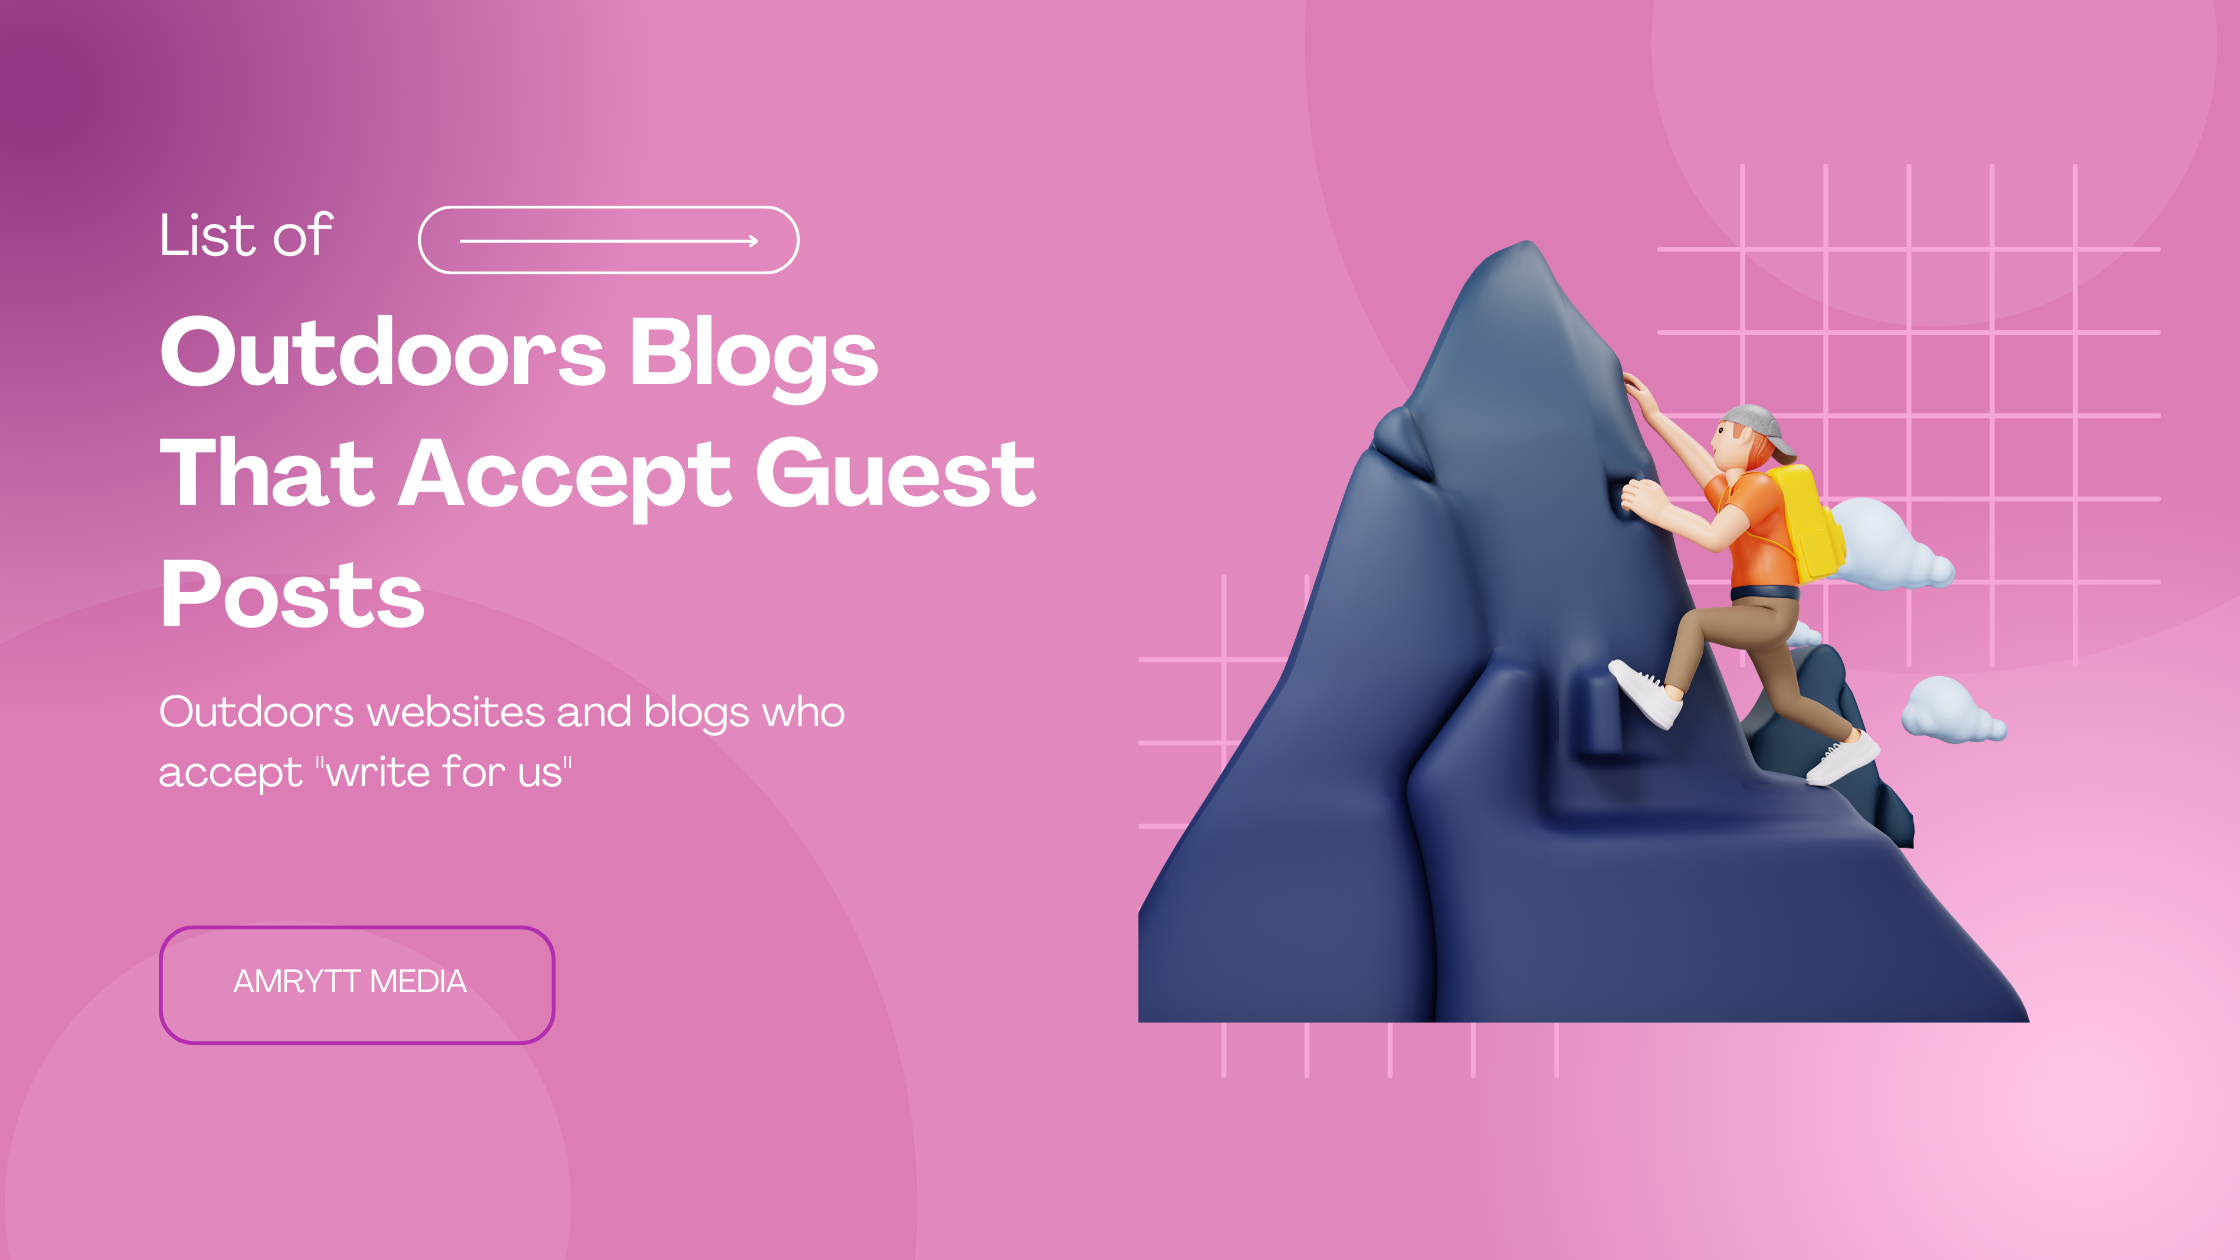 Outdoors Blogs That Accept Guest Posts